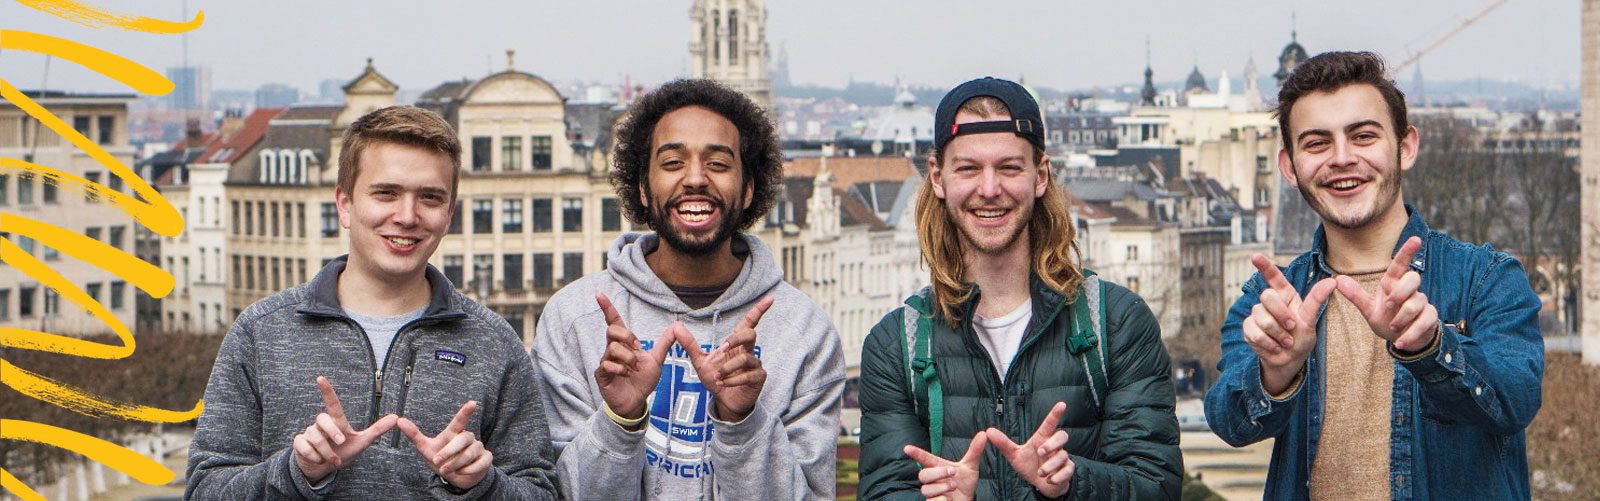 4 UW students do the "W" hand sign in Brussels